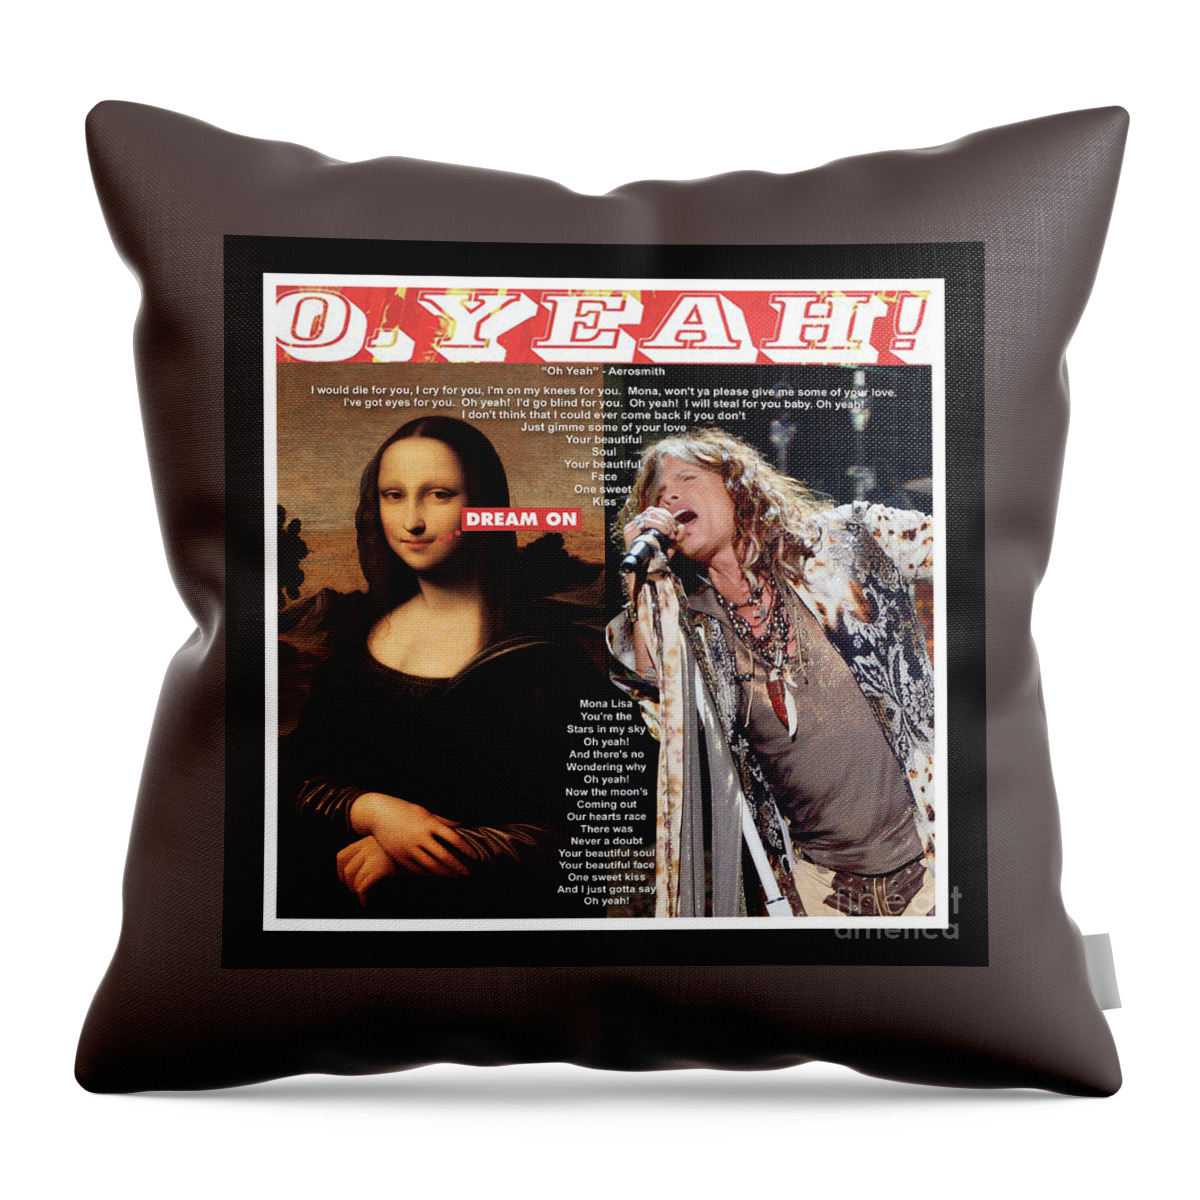 Mona Lisa Throw Pillow featuring the mixed media Mona Lisa and Aerosmith - O' Yeah - Mixed Media Record Album Cover Pop Art Collage by Steven Shaver